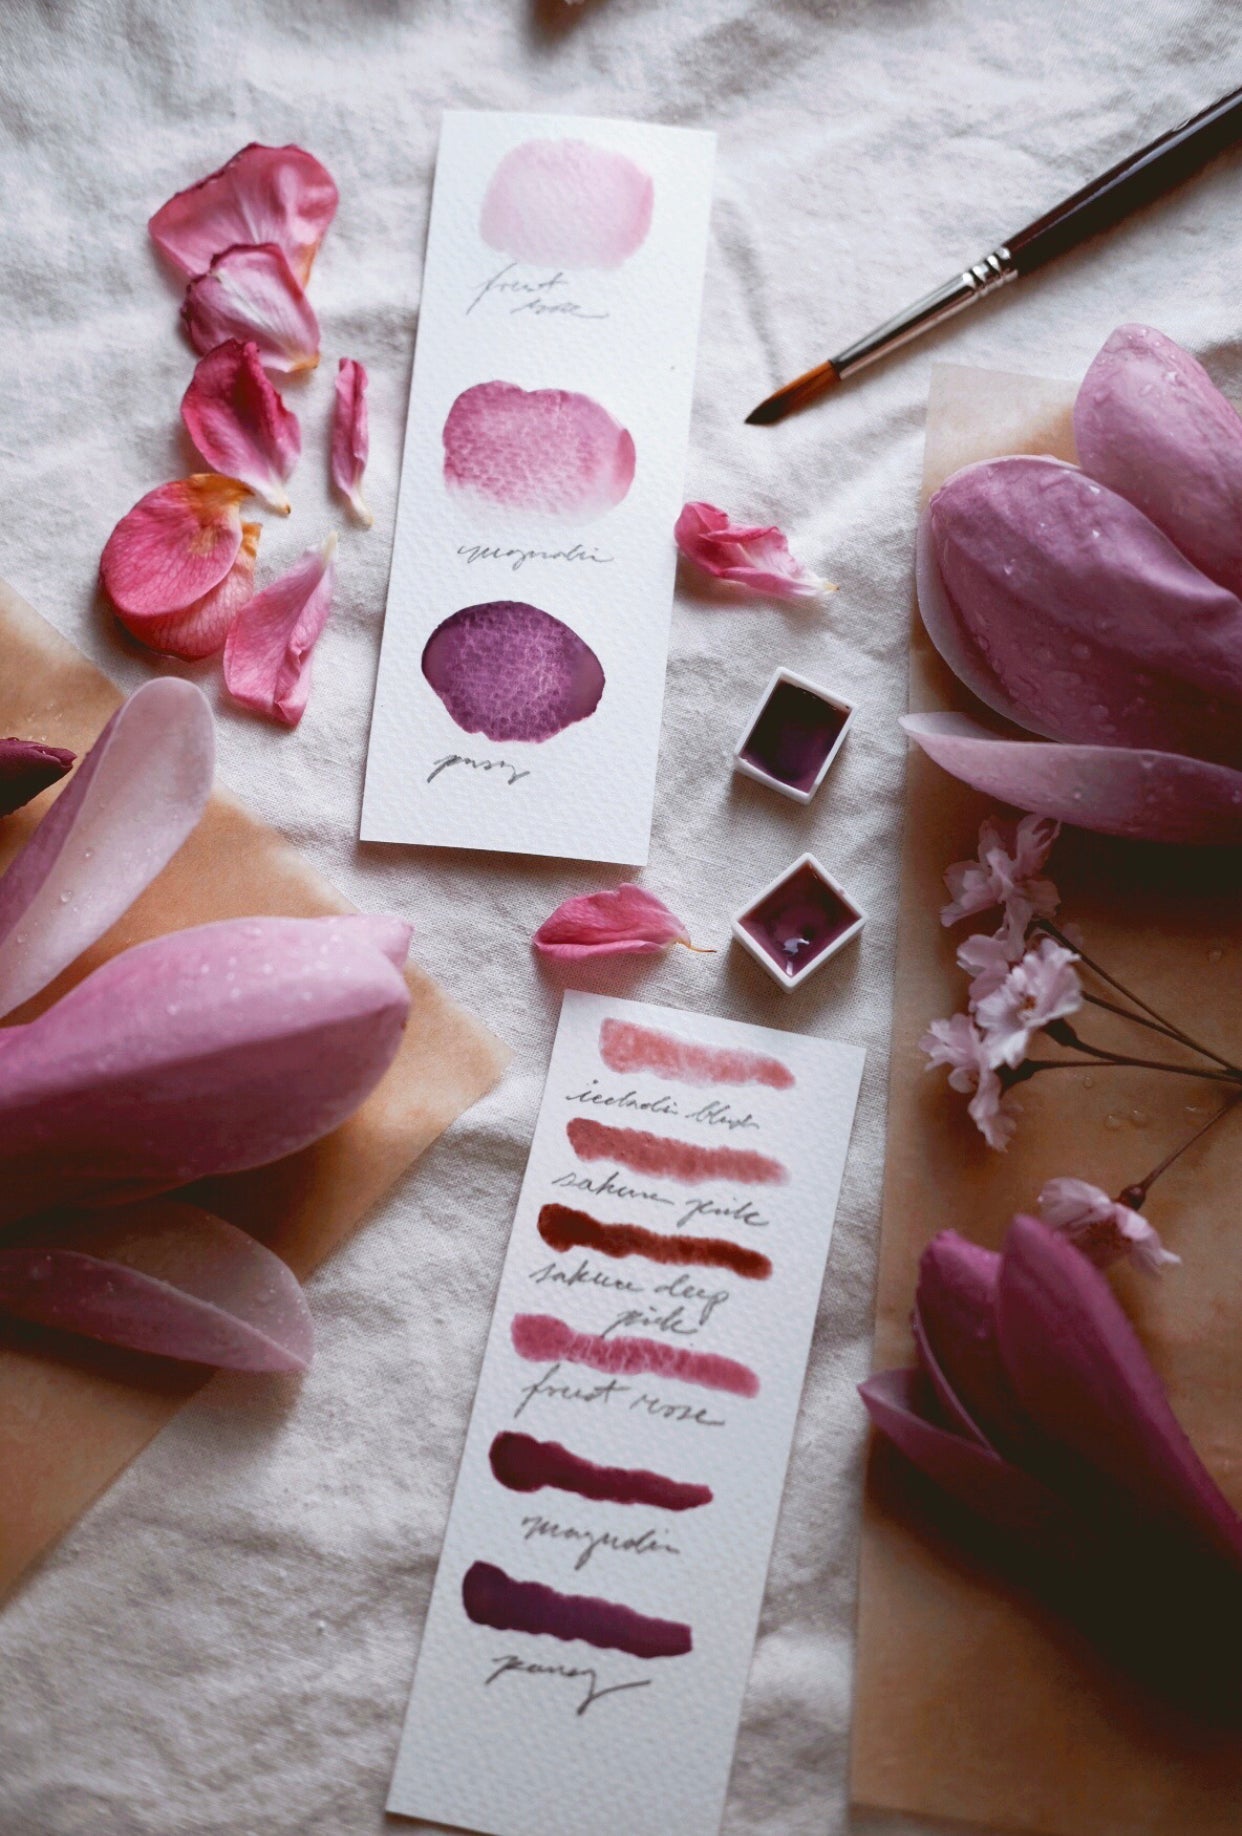 RESERVE for Yasmine + Pink Blossom + Limited edition gemstone watercolor palette